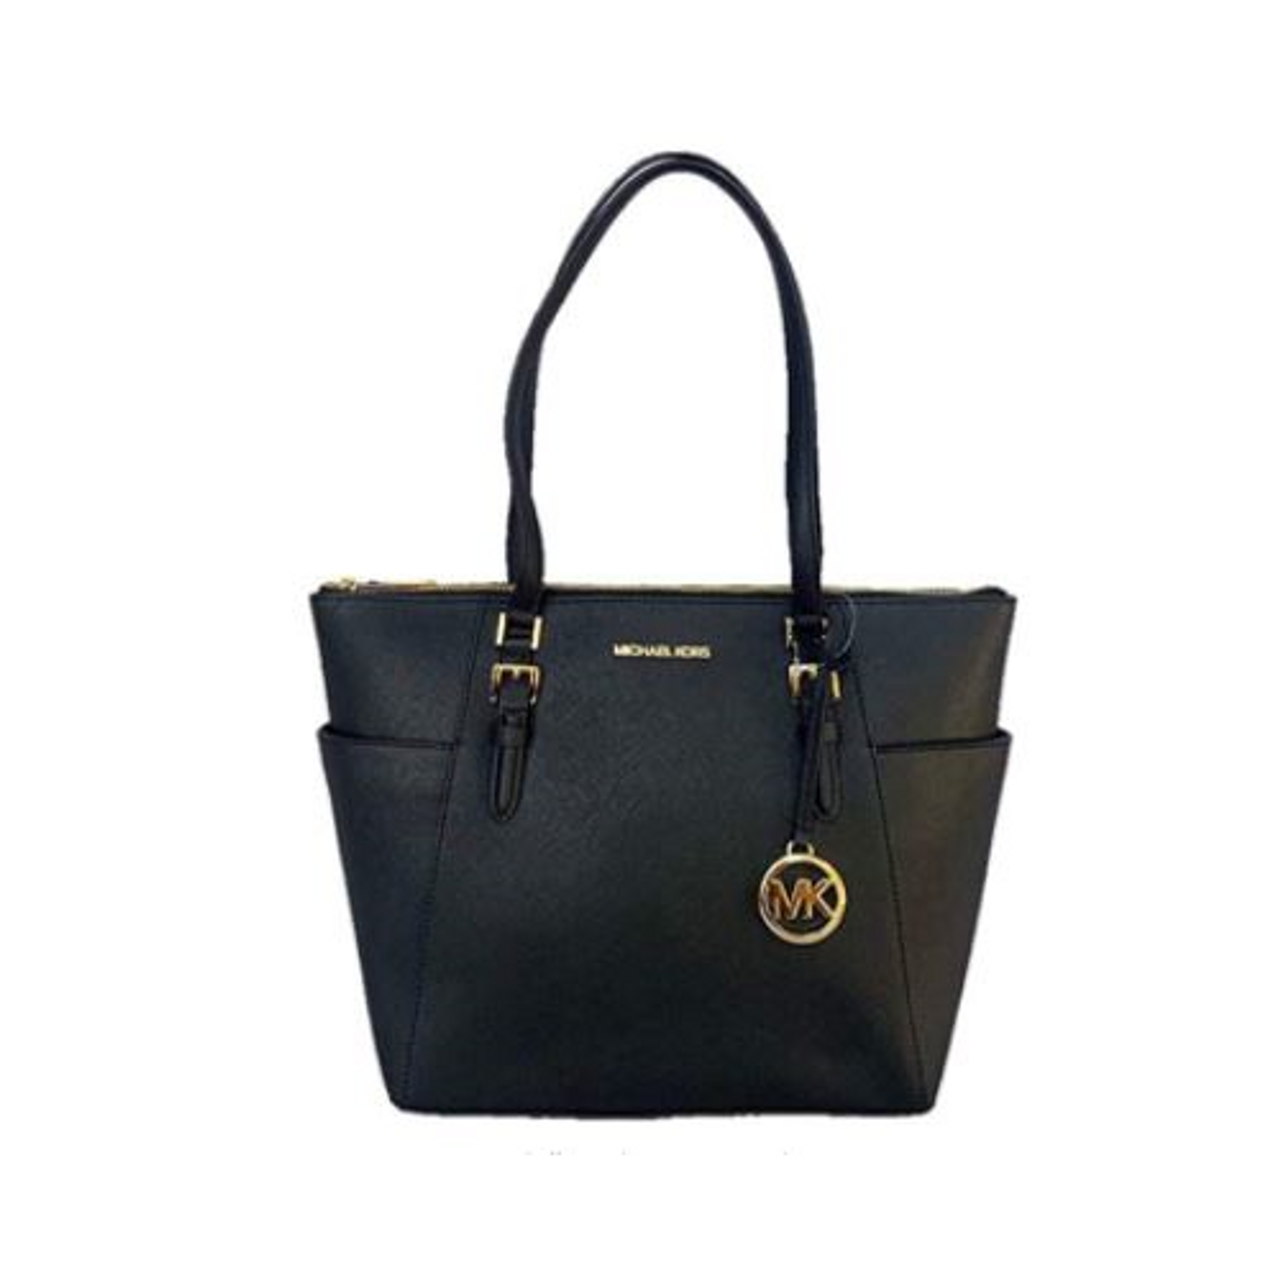 Michael Kors Charlotte Large Top Zip Tote Saffiano Leather in Black 